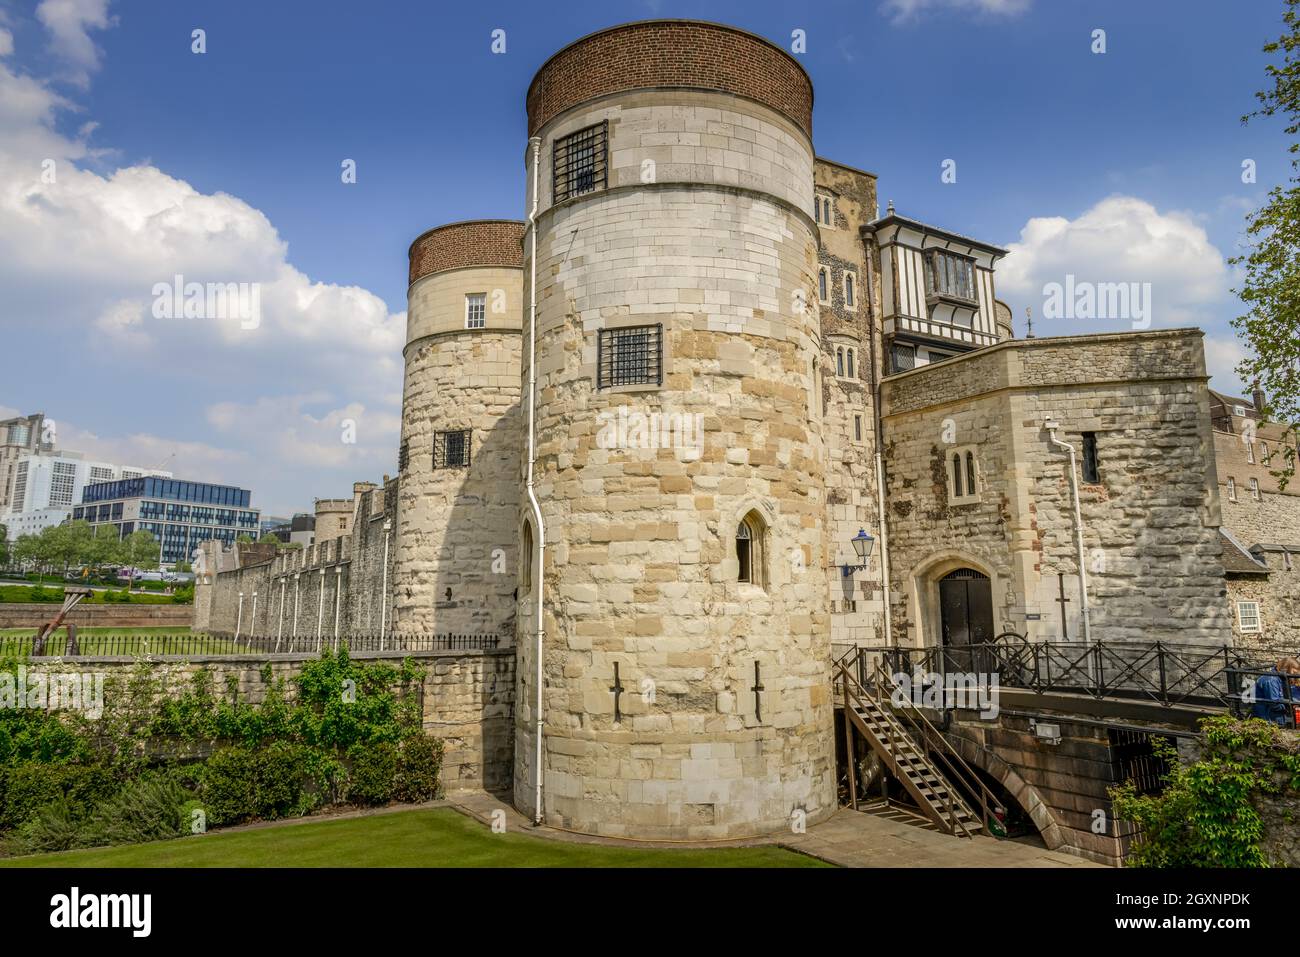 Byward Tower, Tower of London, Londra, Inghilterra, Regno Unito Foto Stock